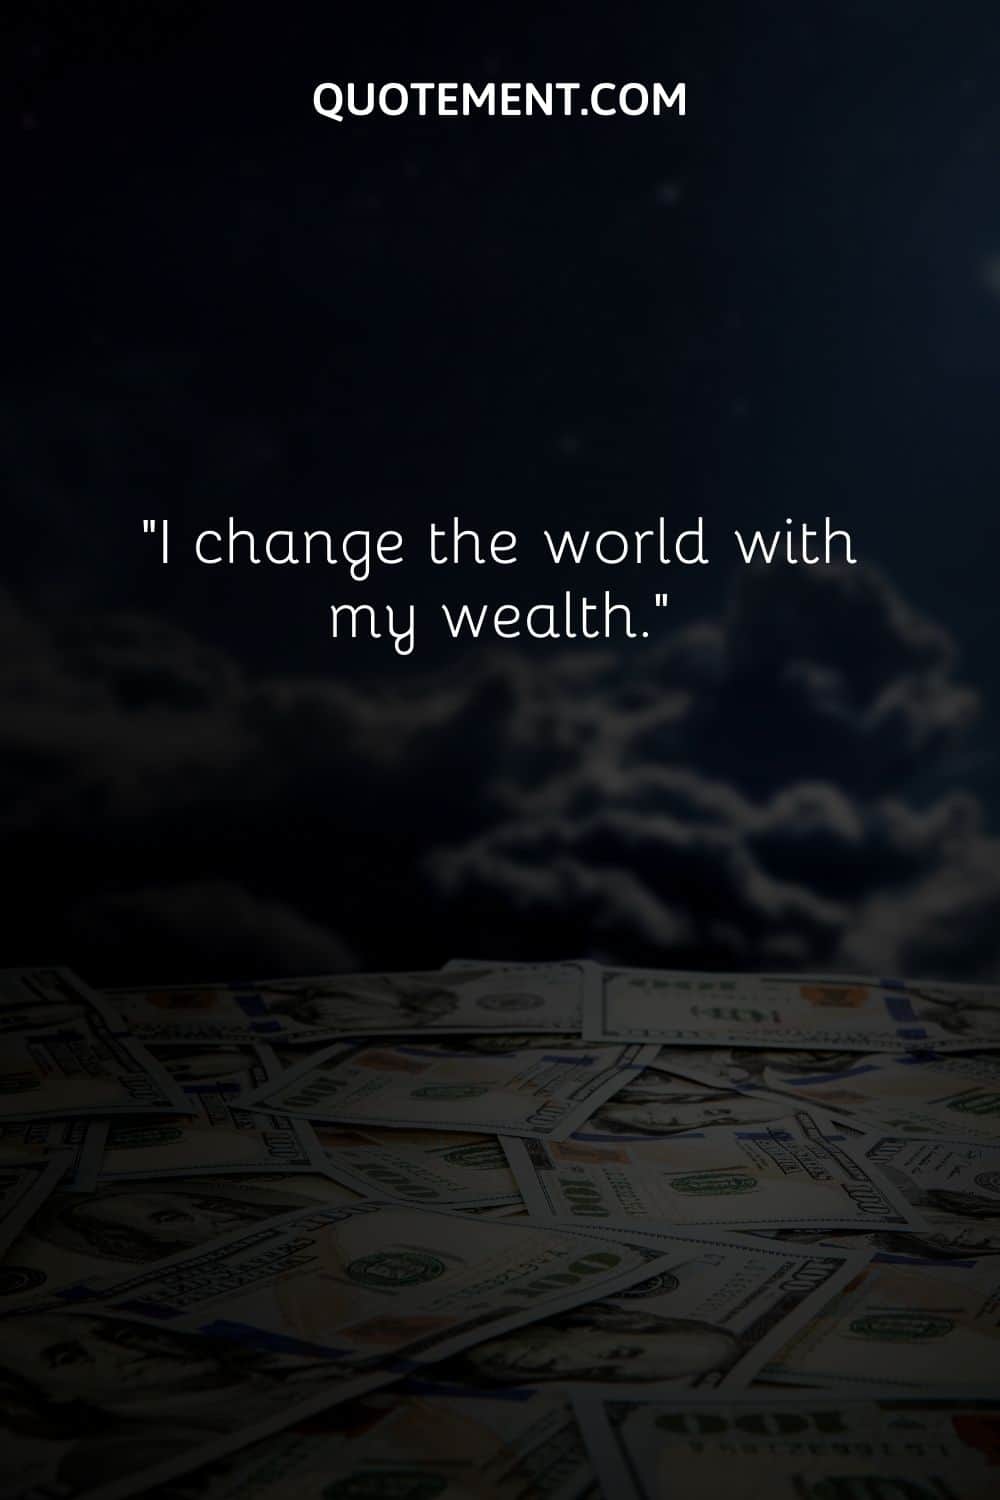 I change the world with my wealth